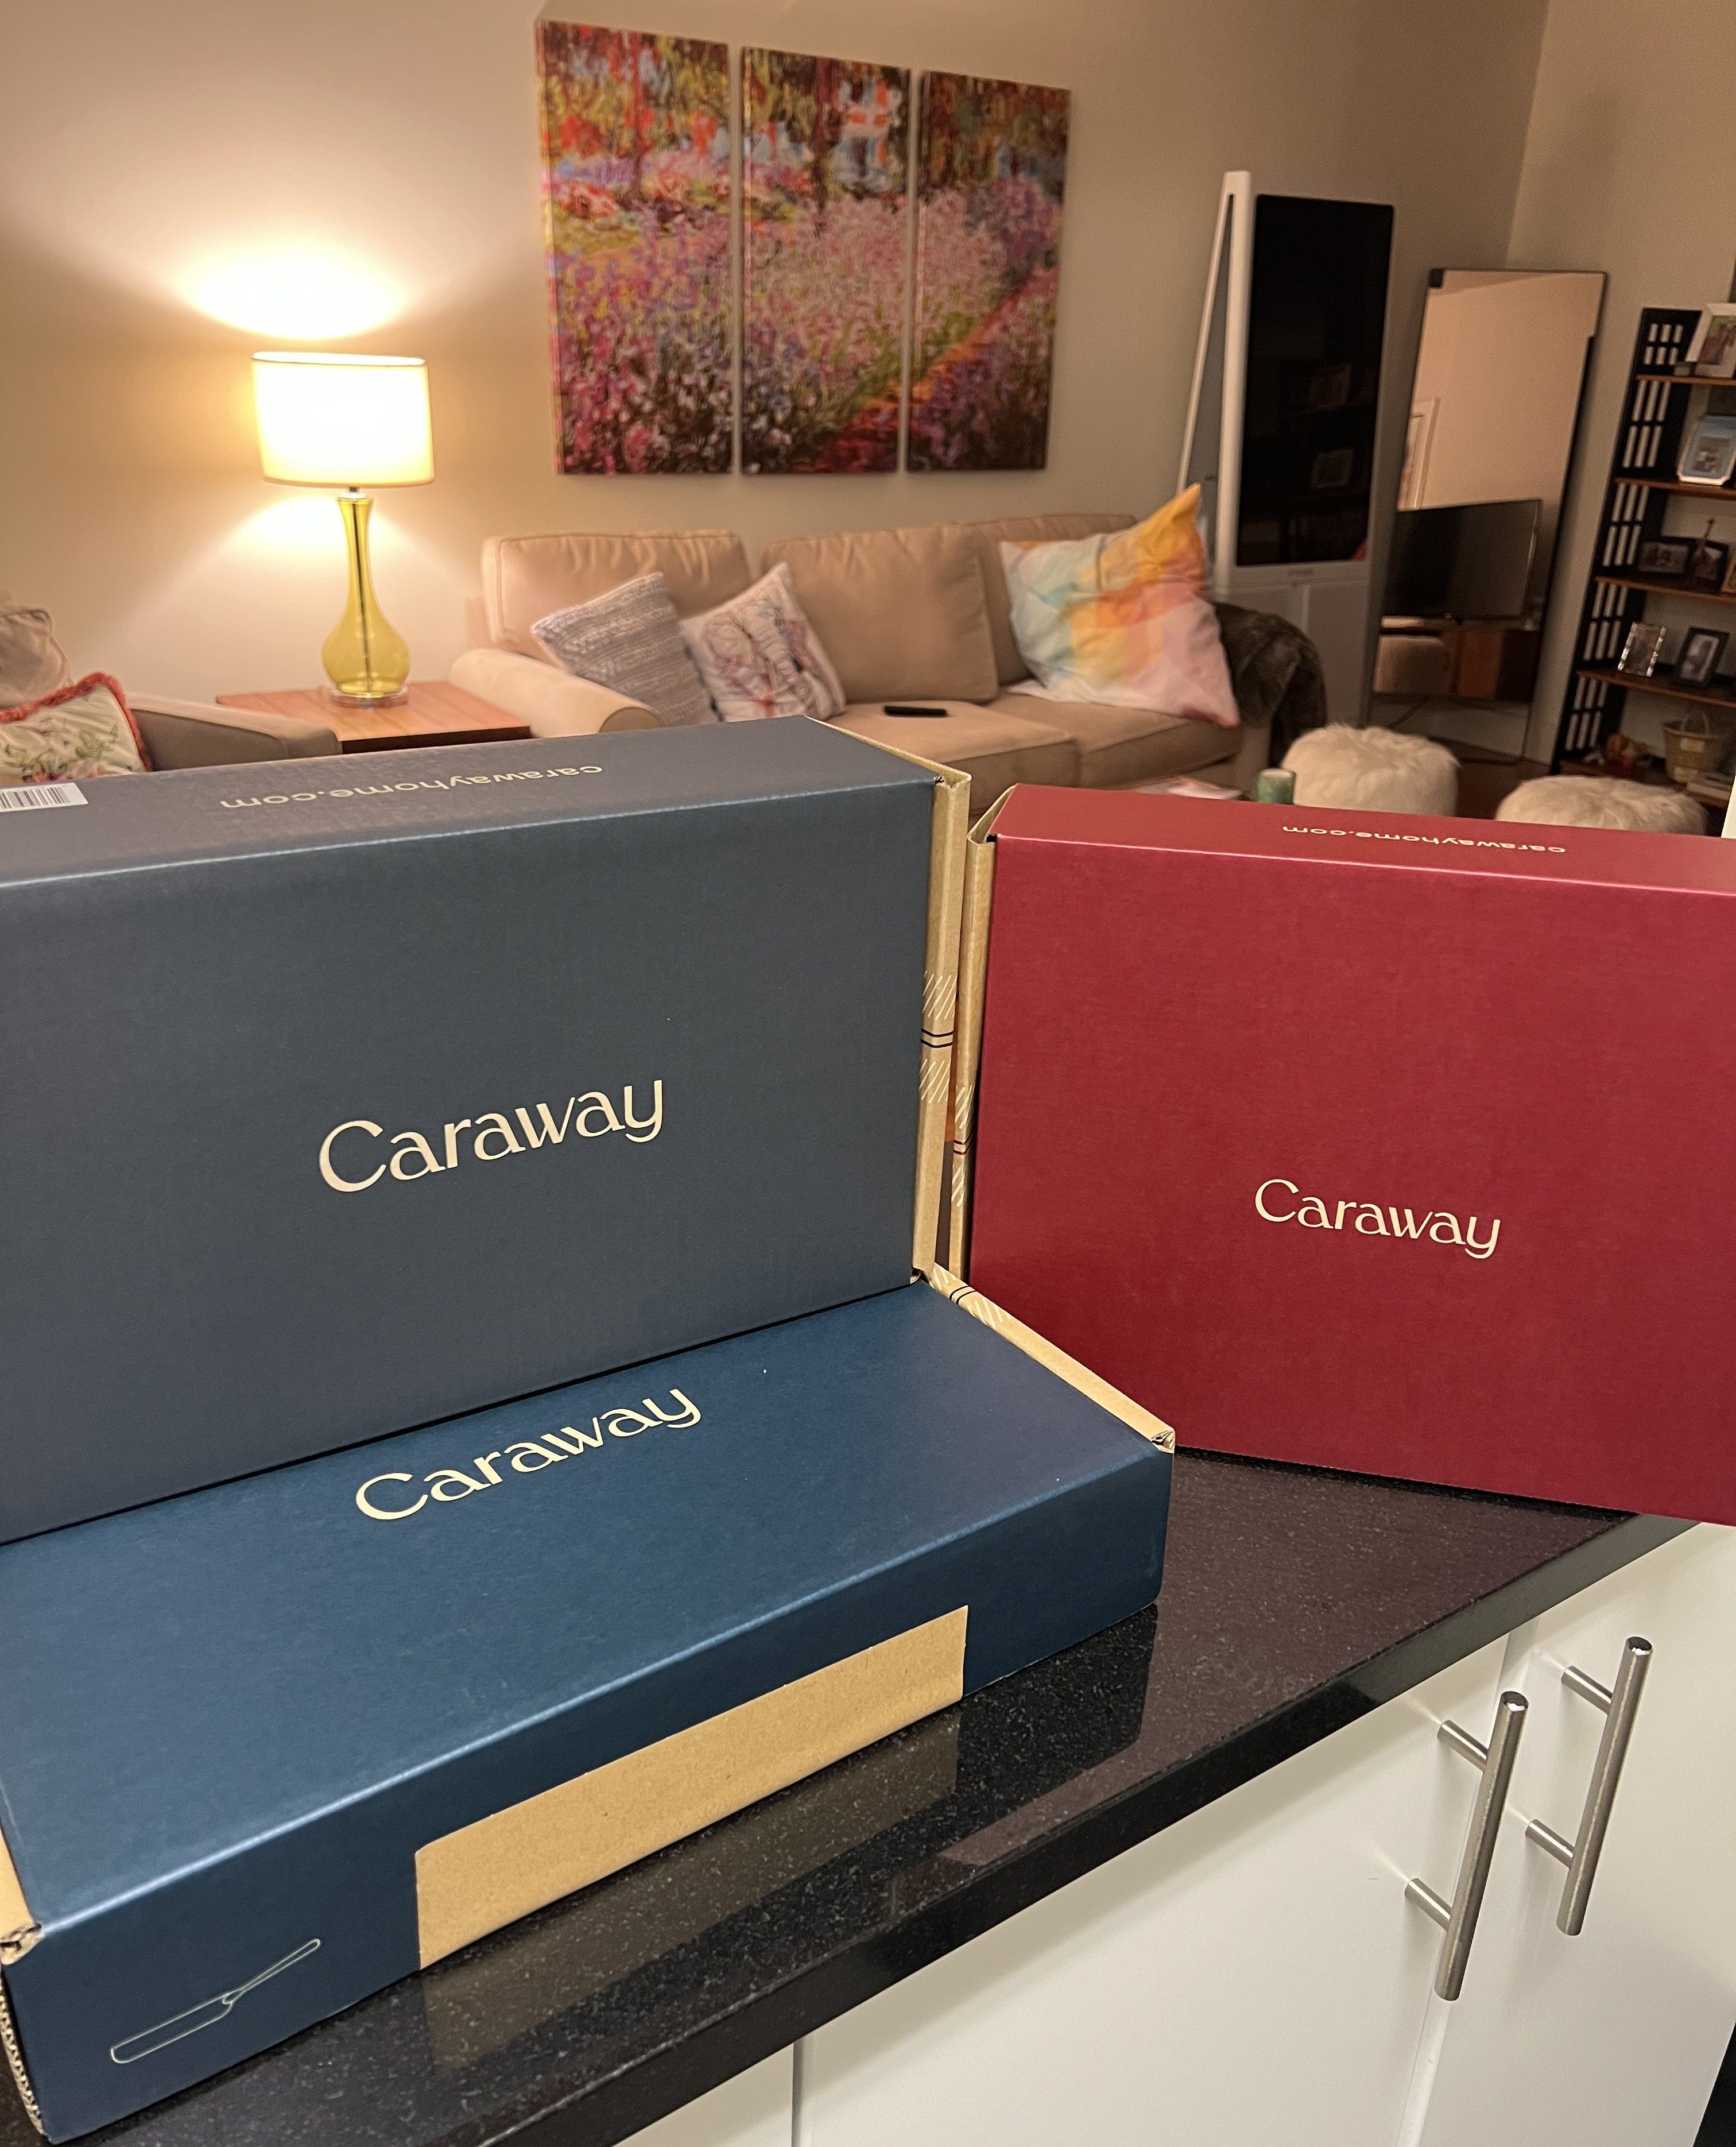 The 5 People in Your Life that Caraway Minis are the Perfect Gift For